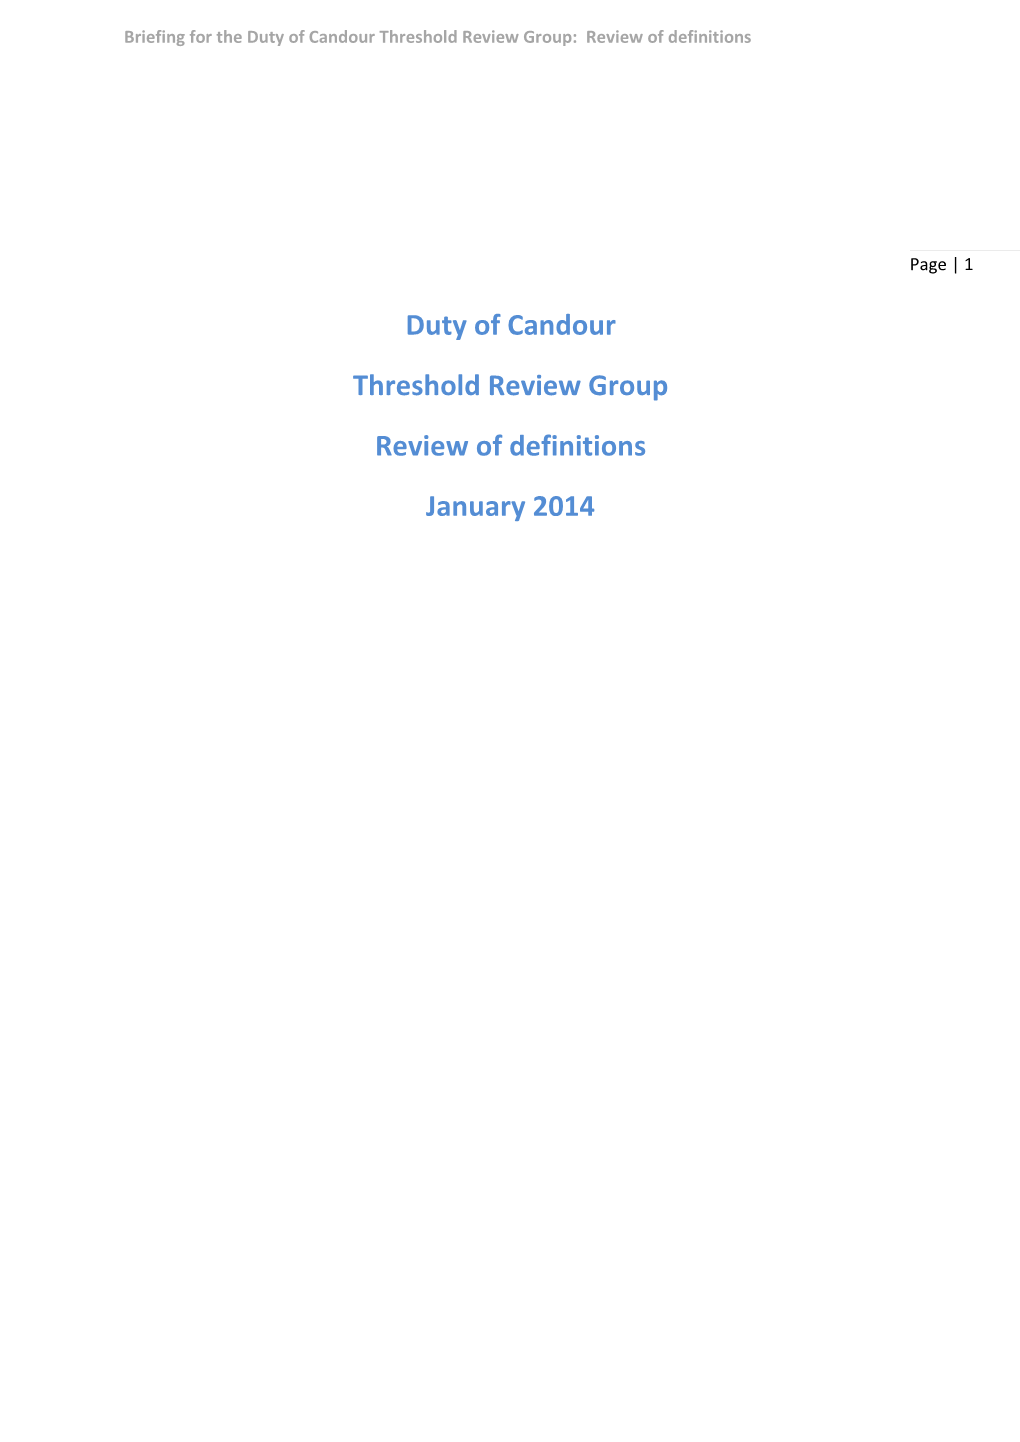 Duty of Candour Threshold Review Group Review of Definitions January 2014